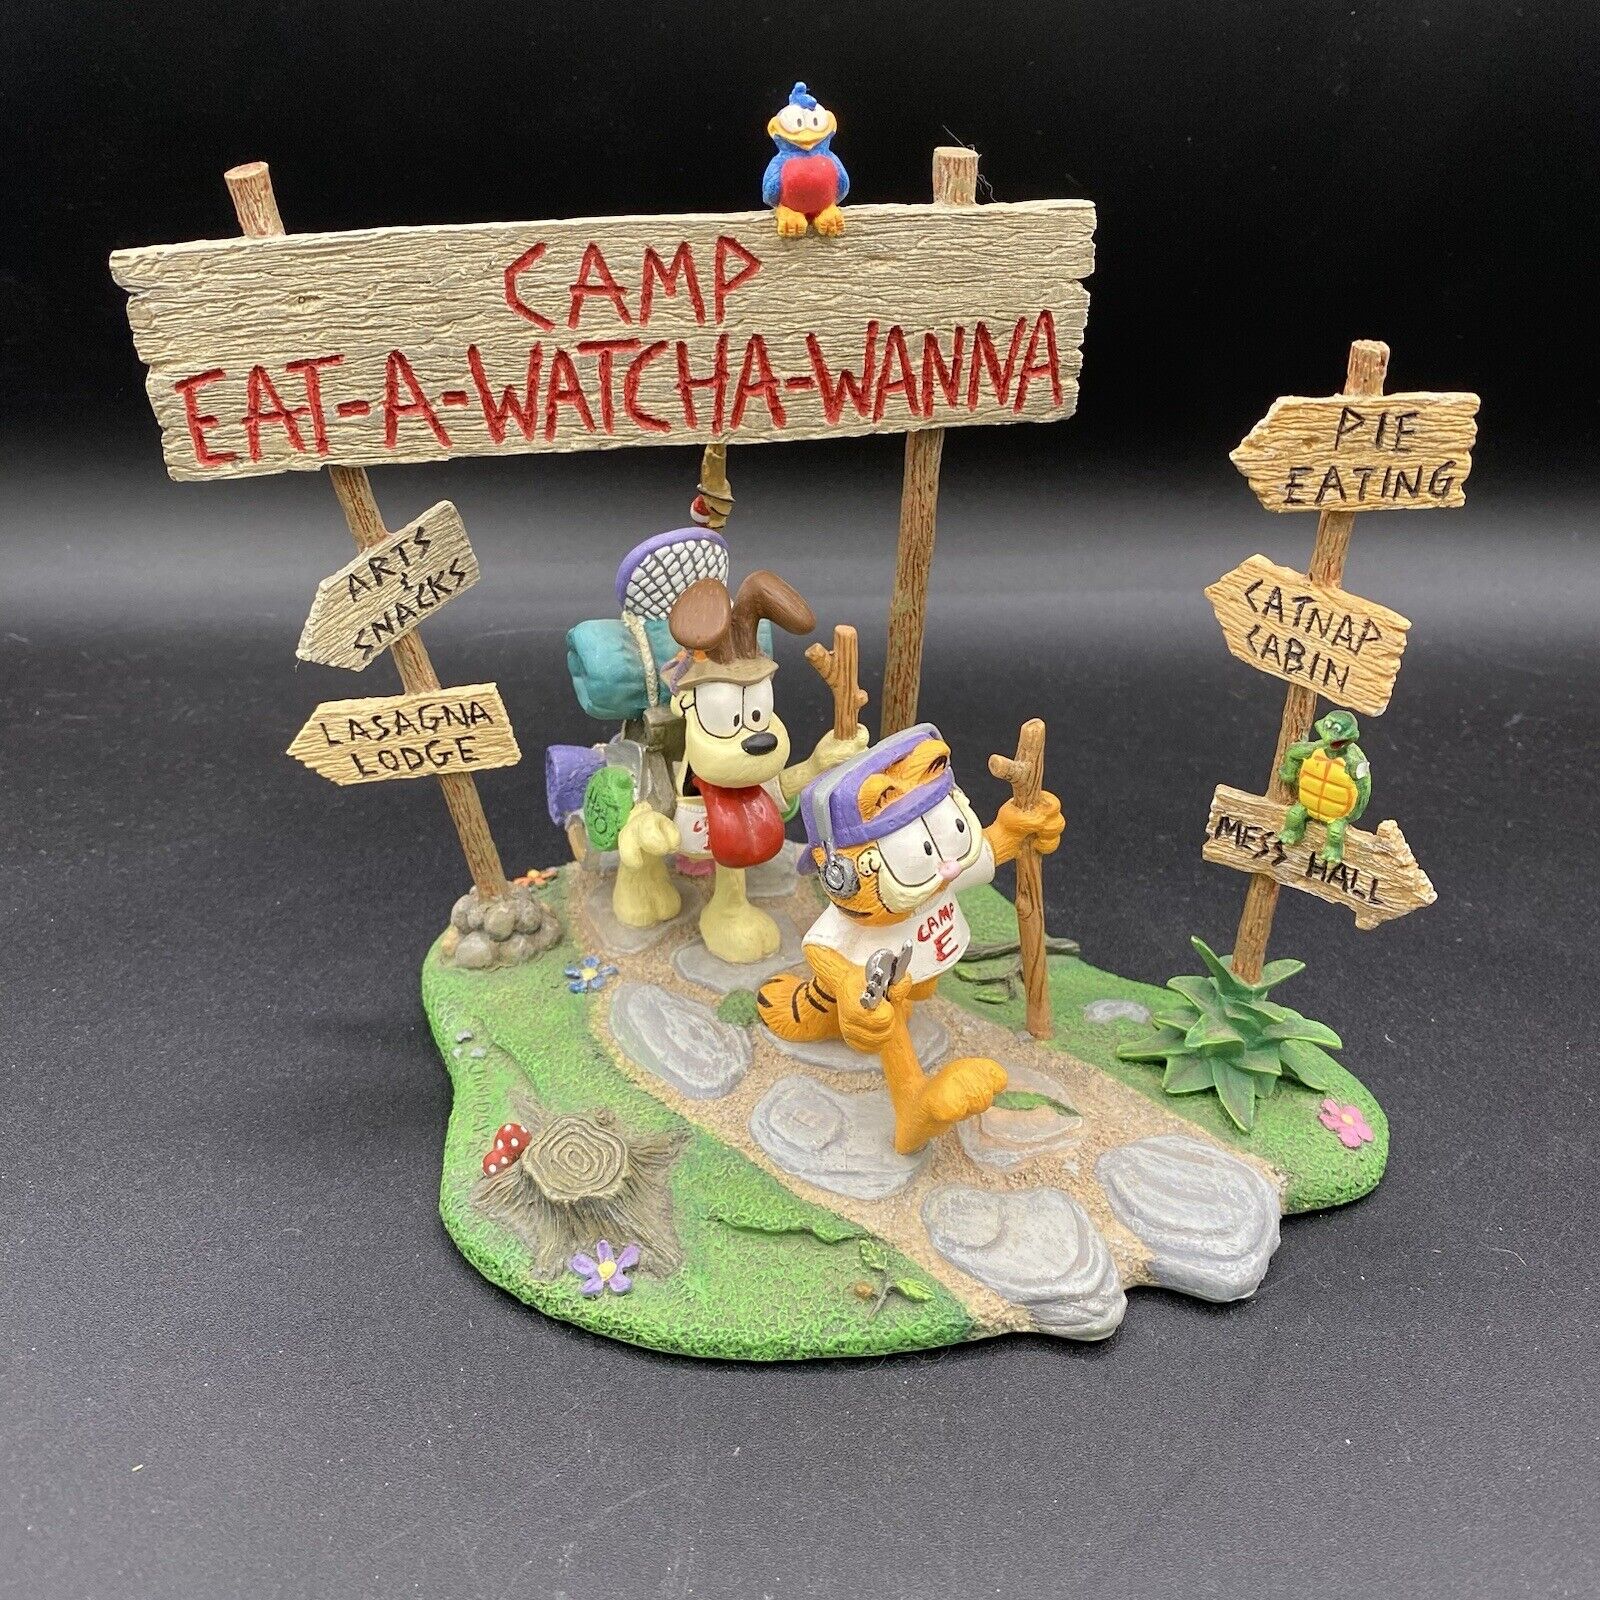 Vintage Garfield Camp Eat-A-Watcha-Wanna by Danbury Mint Figure With Certificate